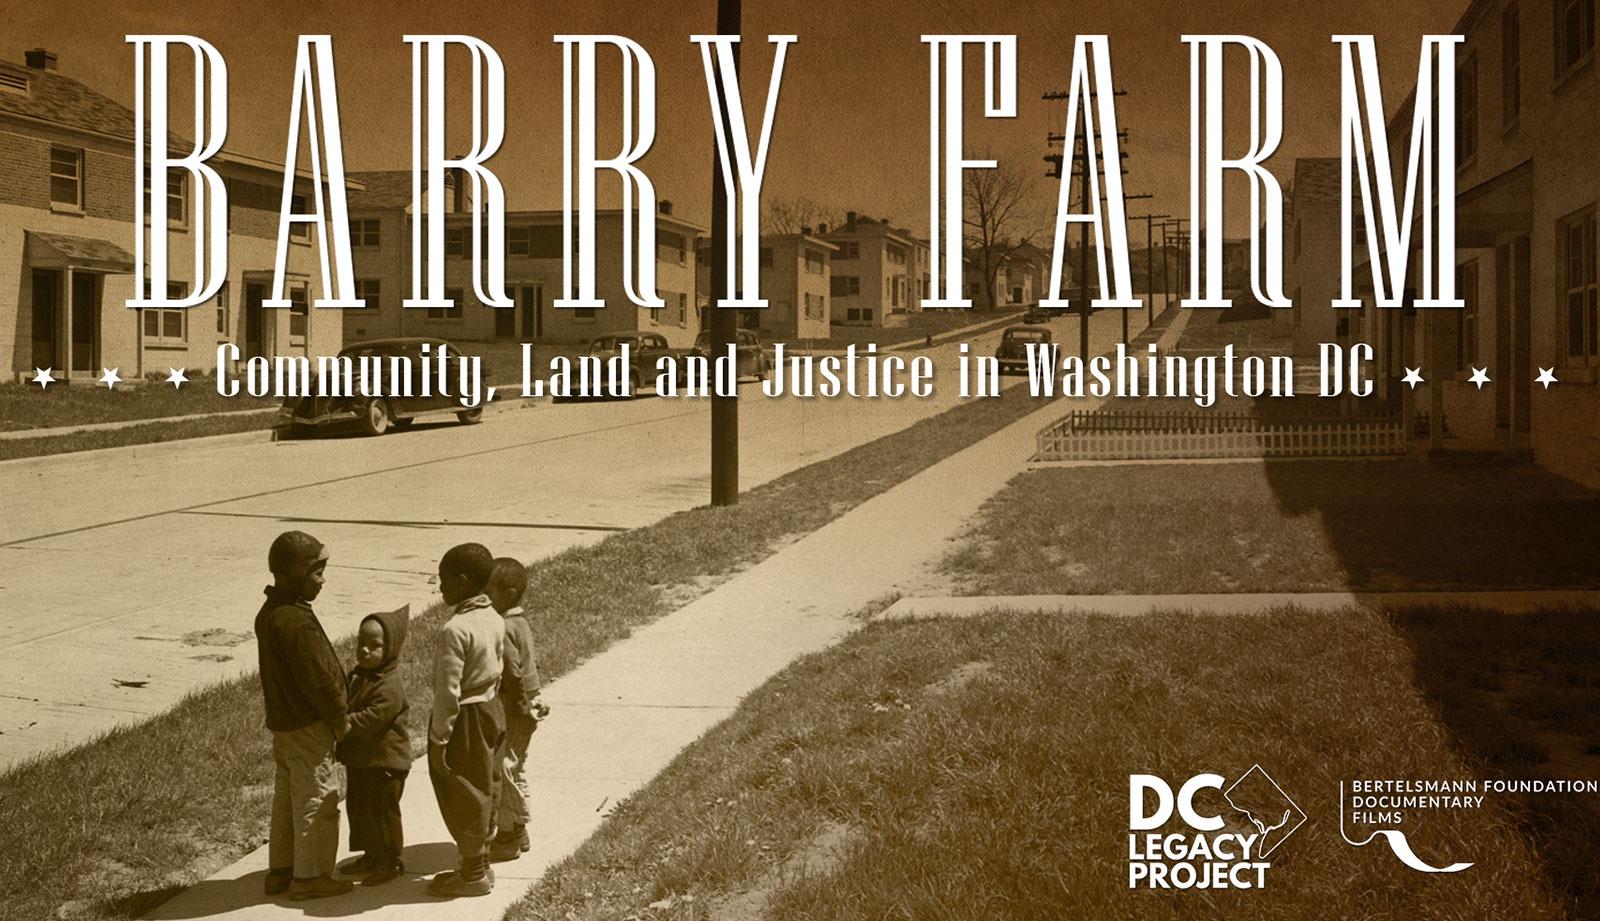 Barry Farm: Community, Land and Justice in Washington D.C.